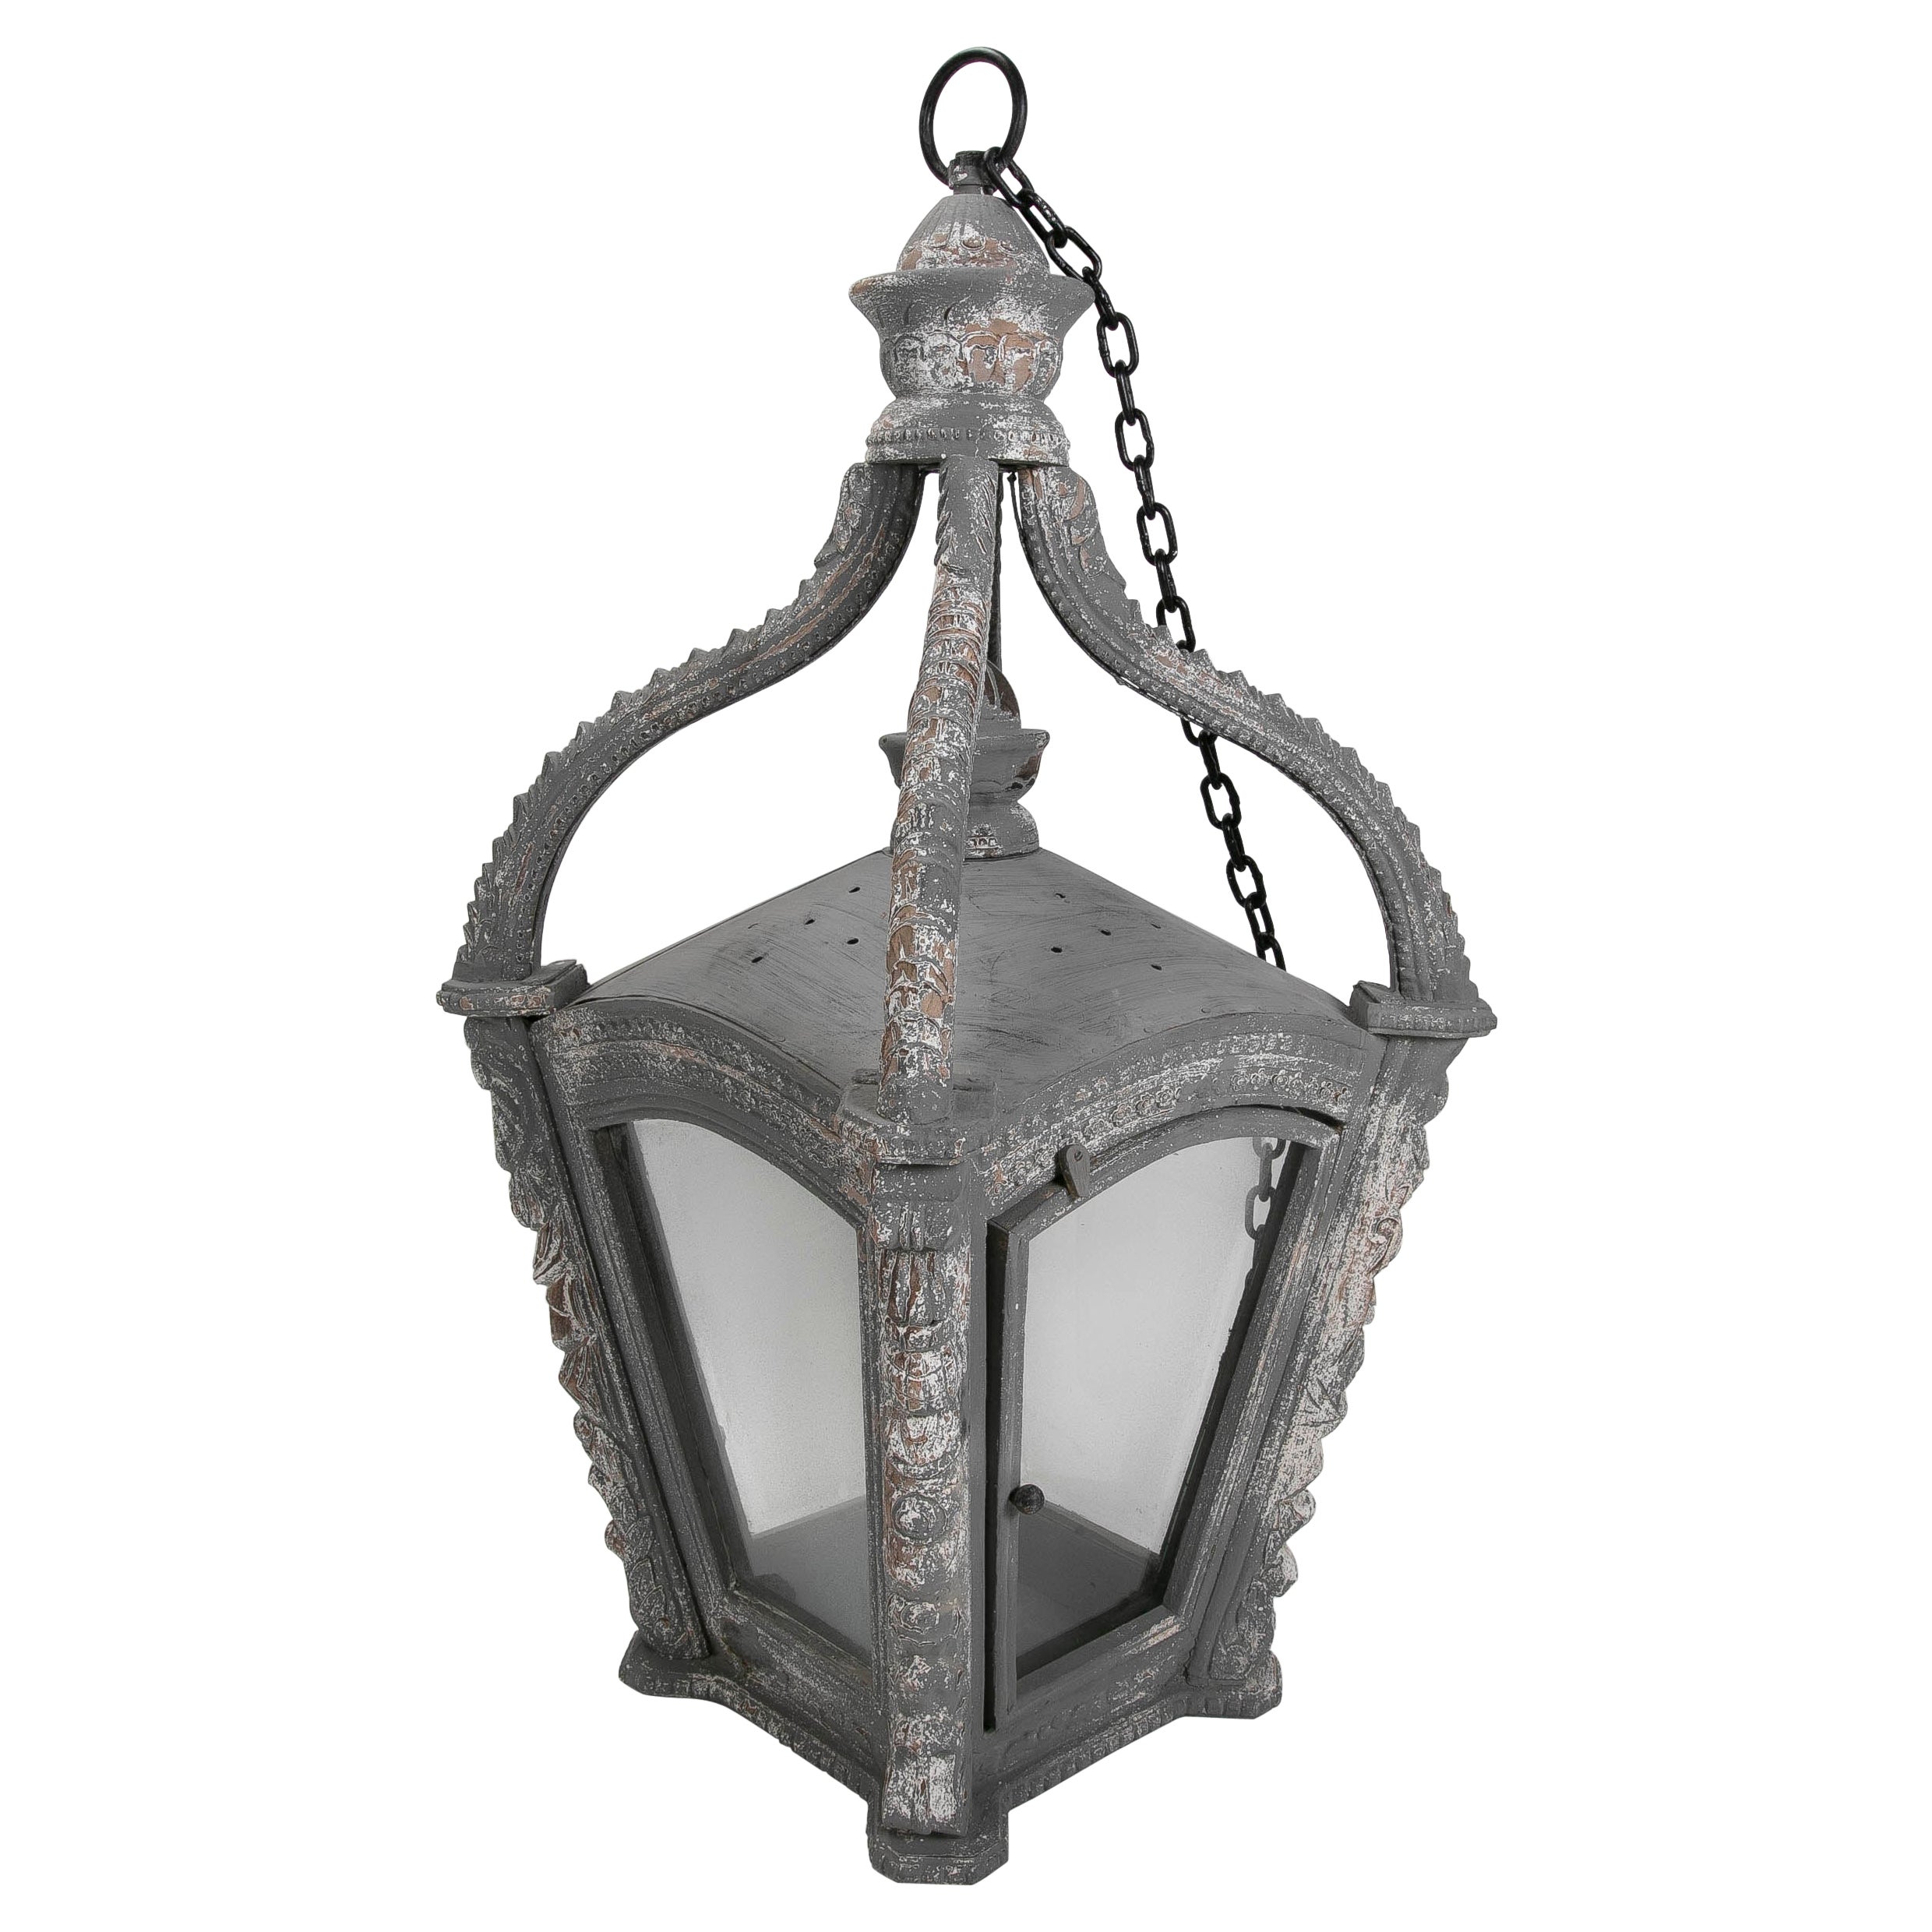 Ceiling Lantern Carved in Wood with Antique Finish in Grey Tones